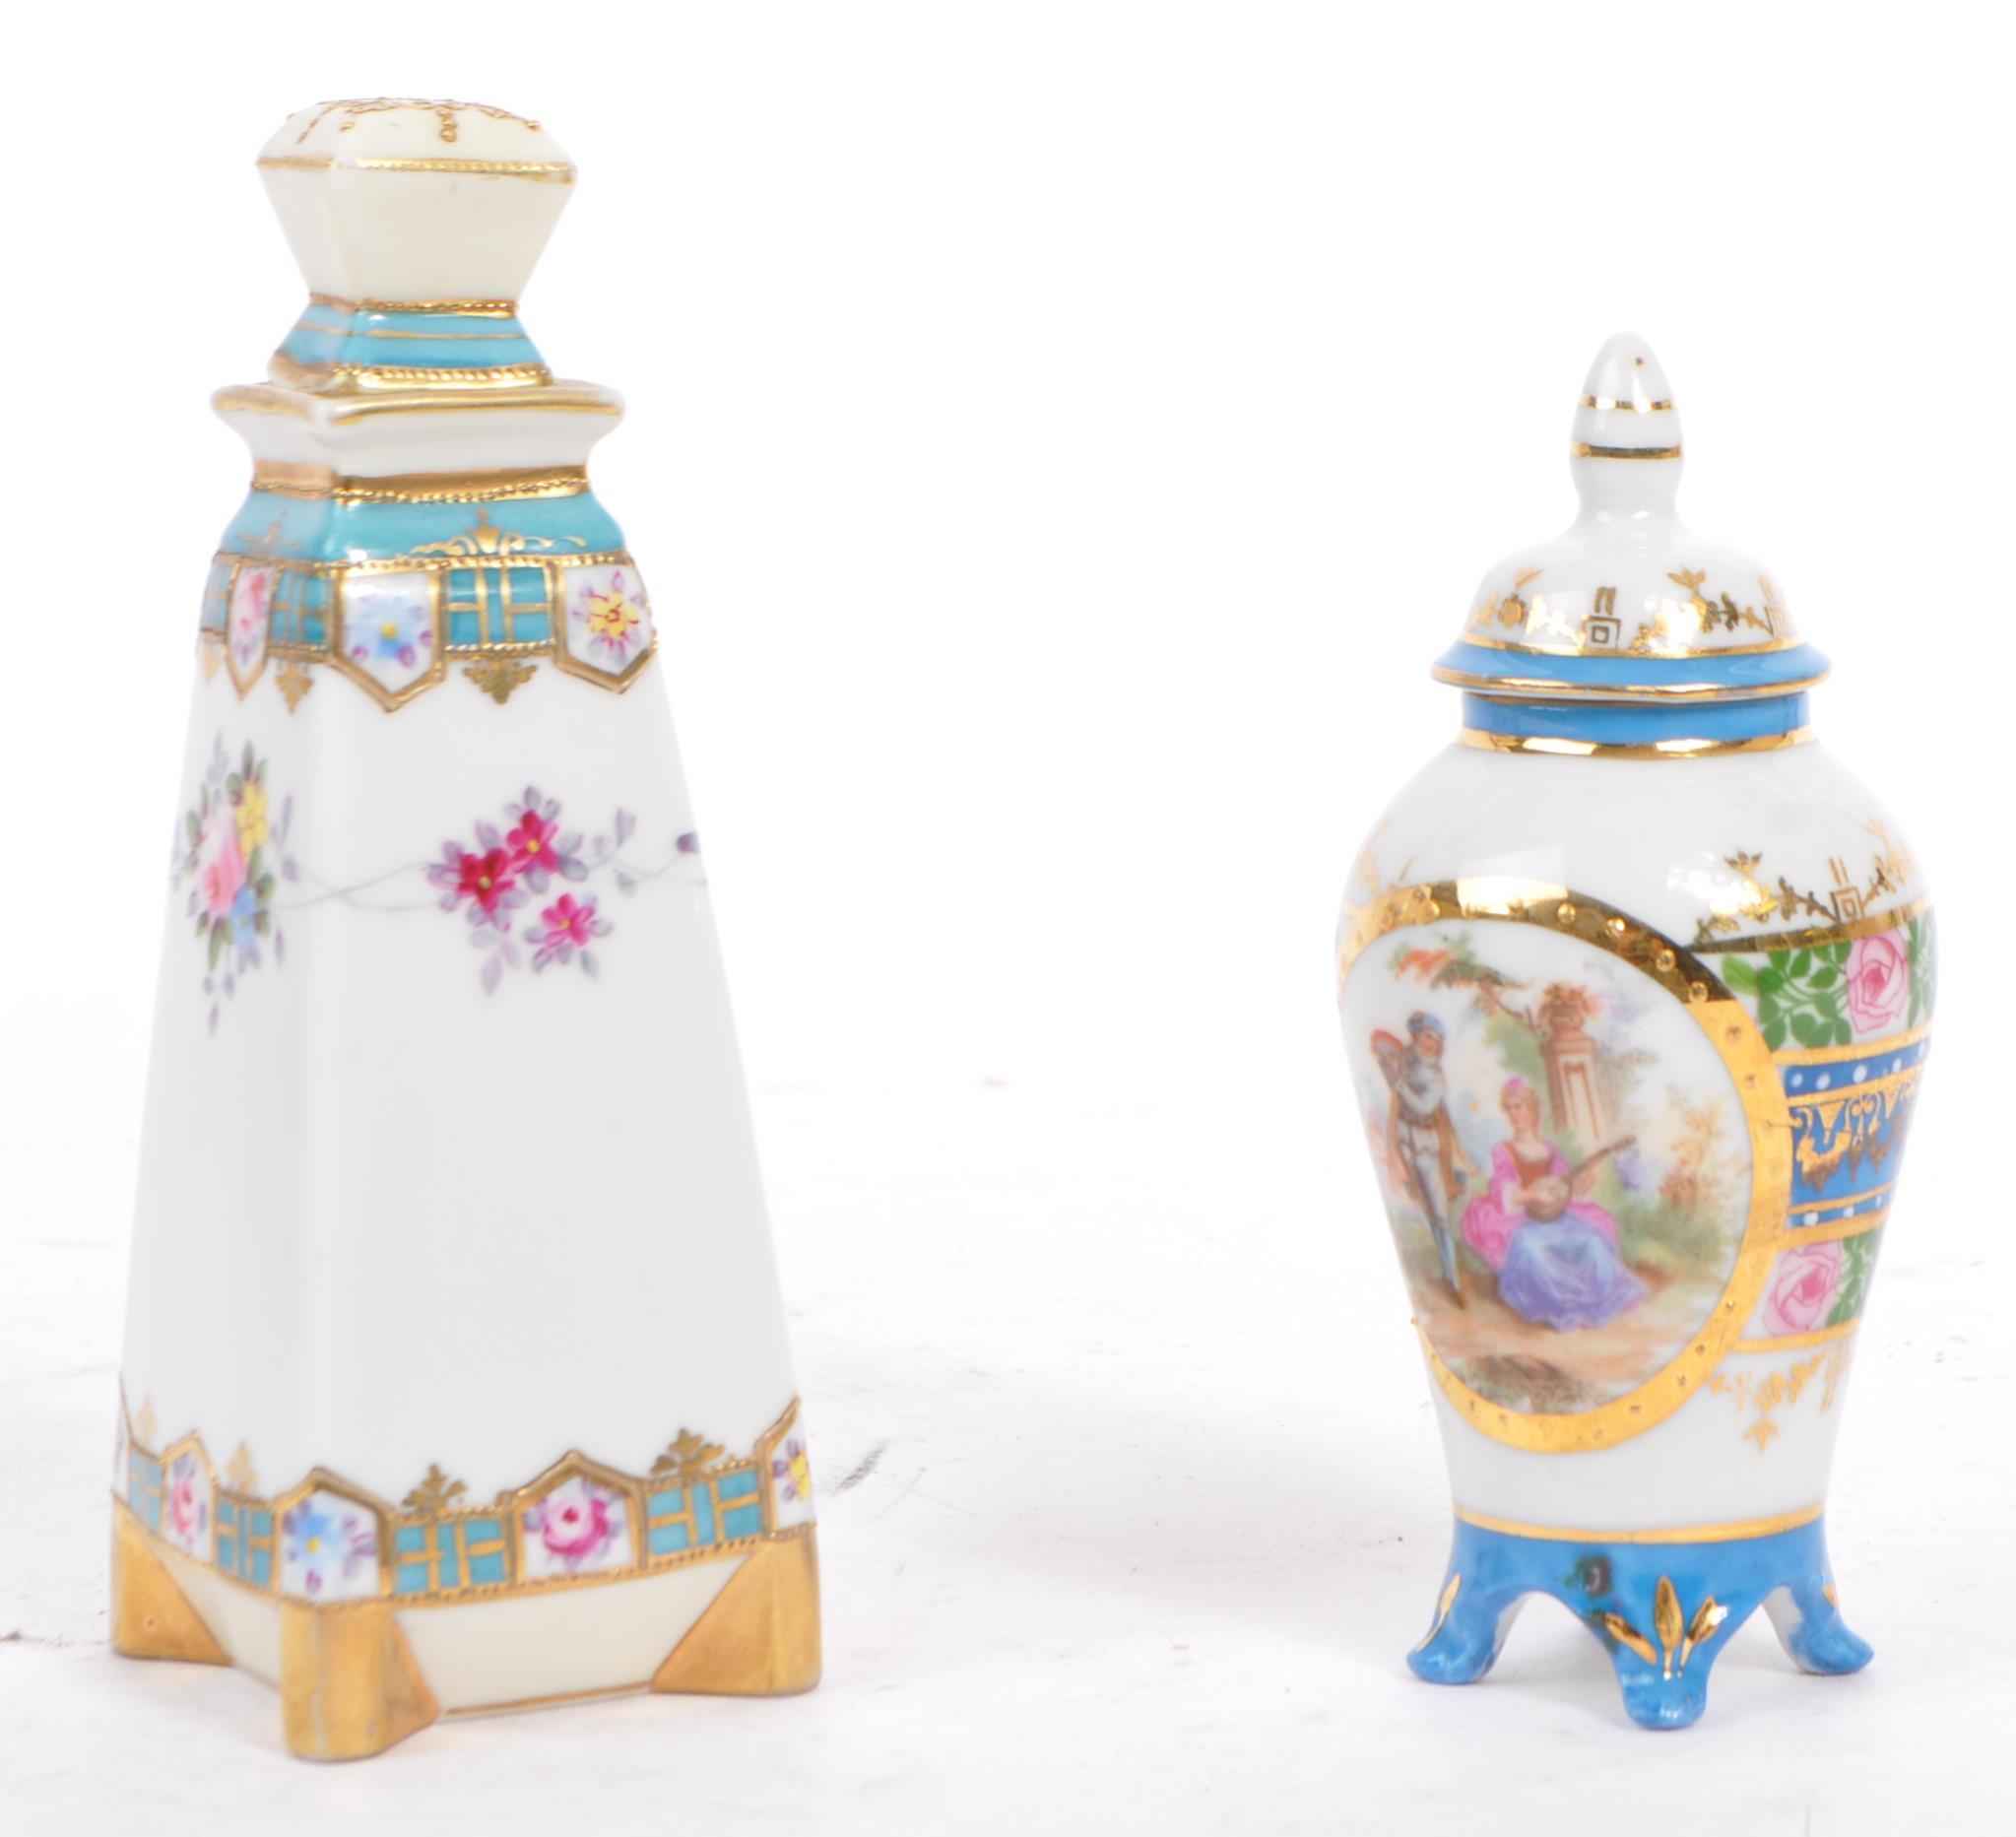 COLLECTION OF MINIATURE PORCELAIN VASES / URNS ETC. - Image 6 of 6